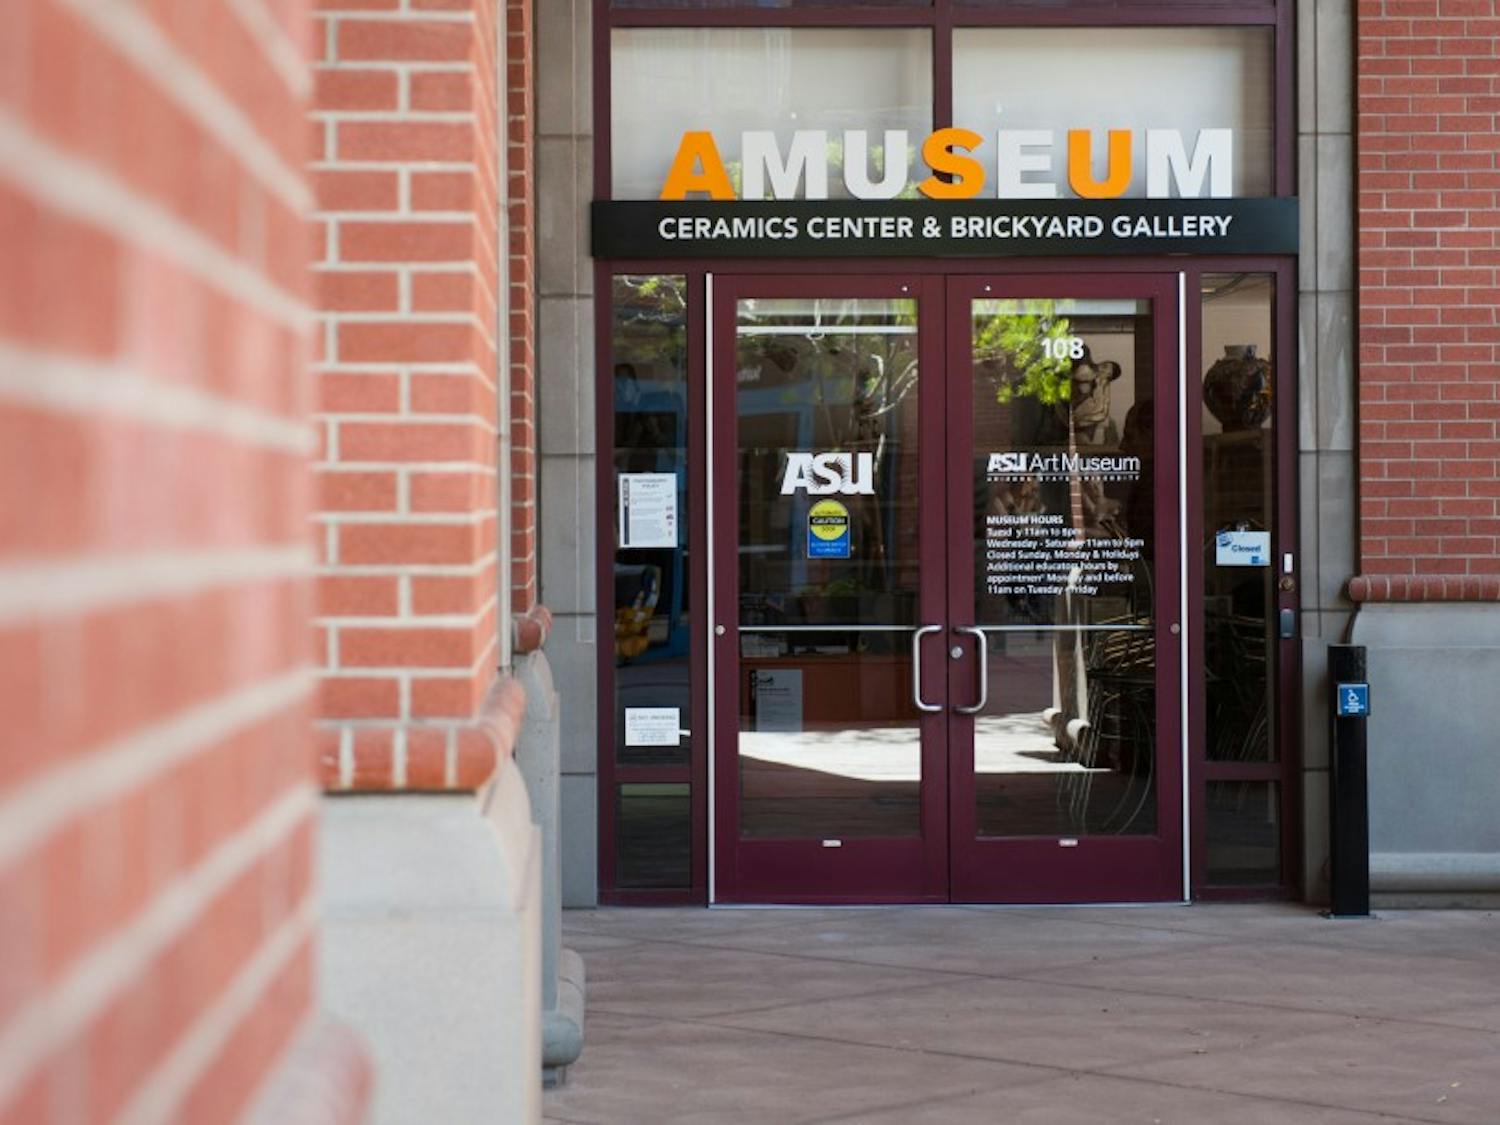 The exterior of the ASU Art Museum is pictured on Tuesday, April 26, 2016, at the Brickyard in Tempe.